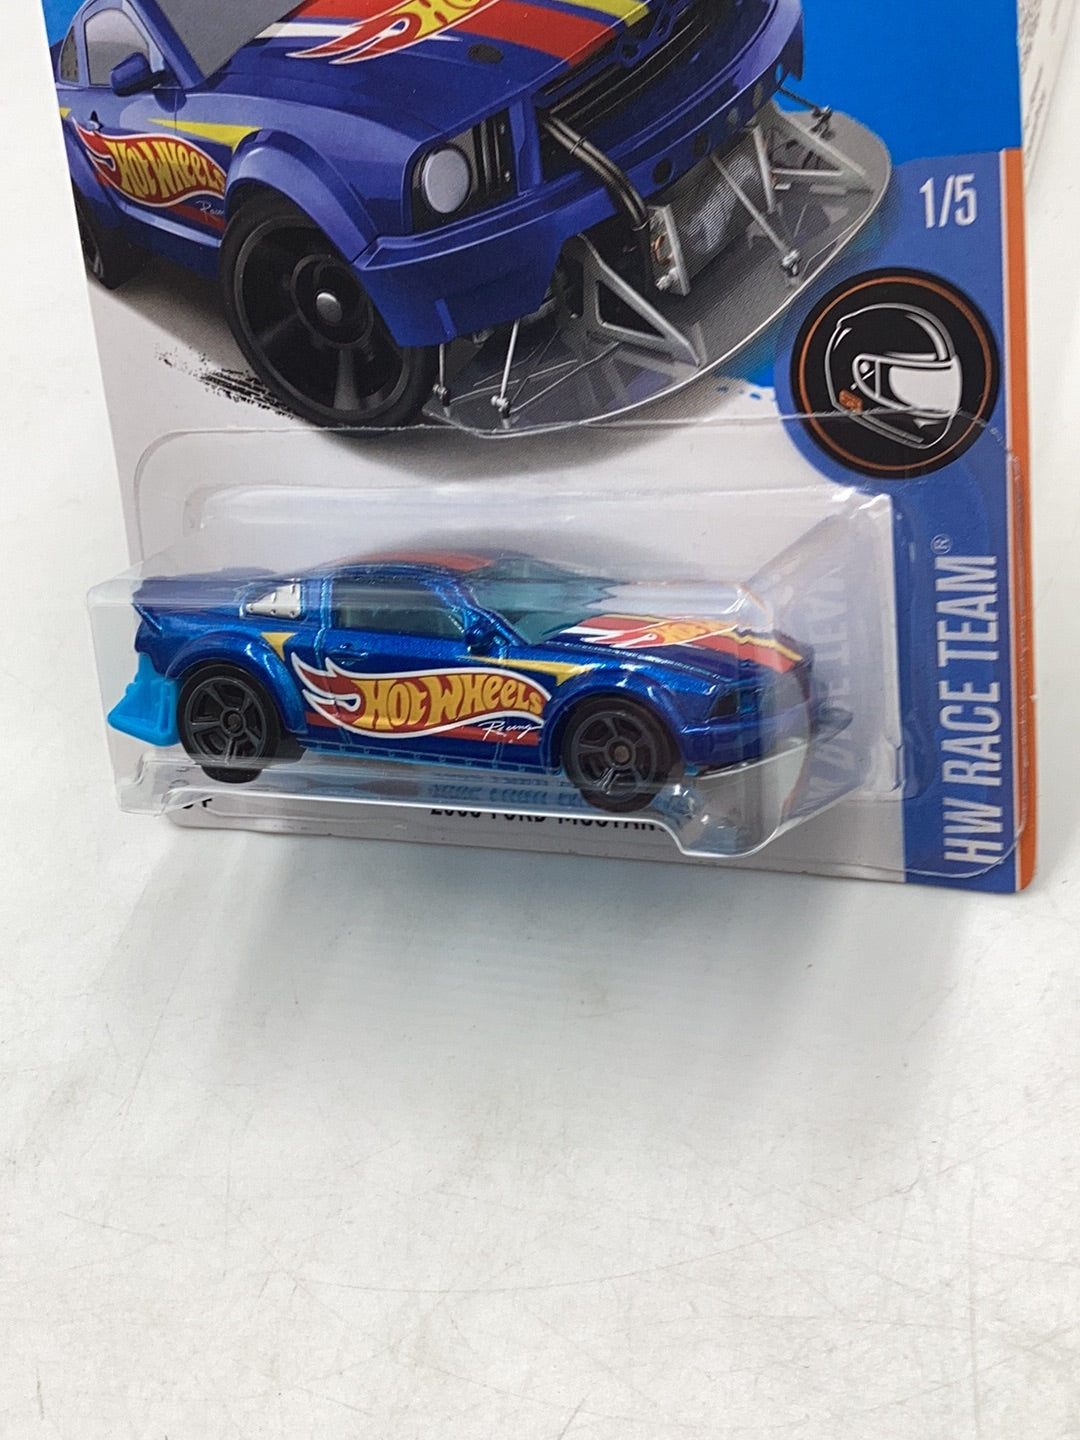 2017 Hot Wheels #280 2005 Ford Mustang factory sealed sticker 27B